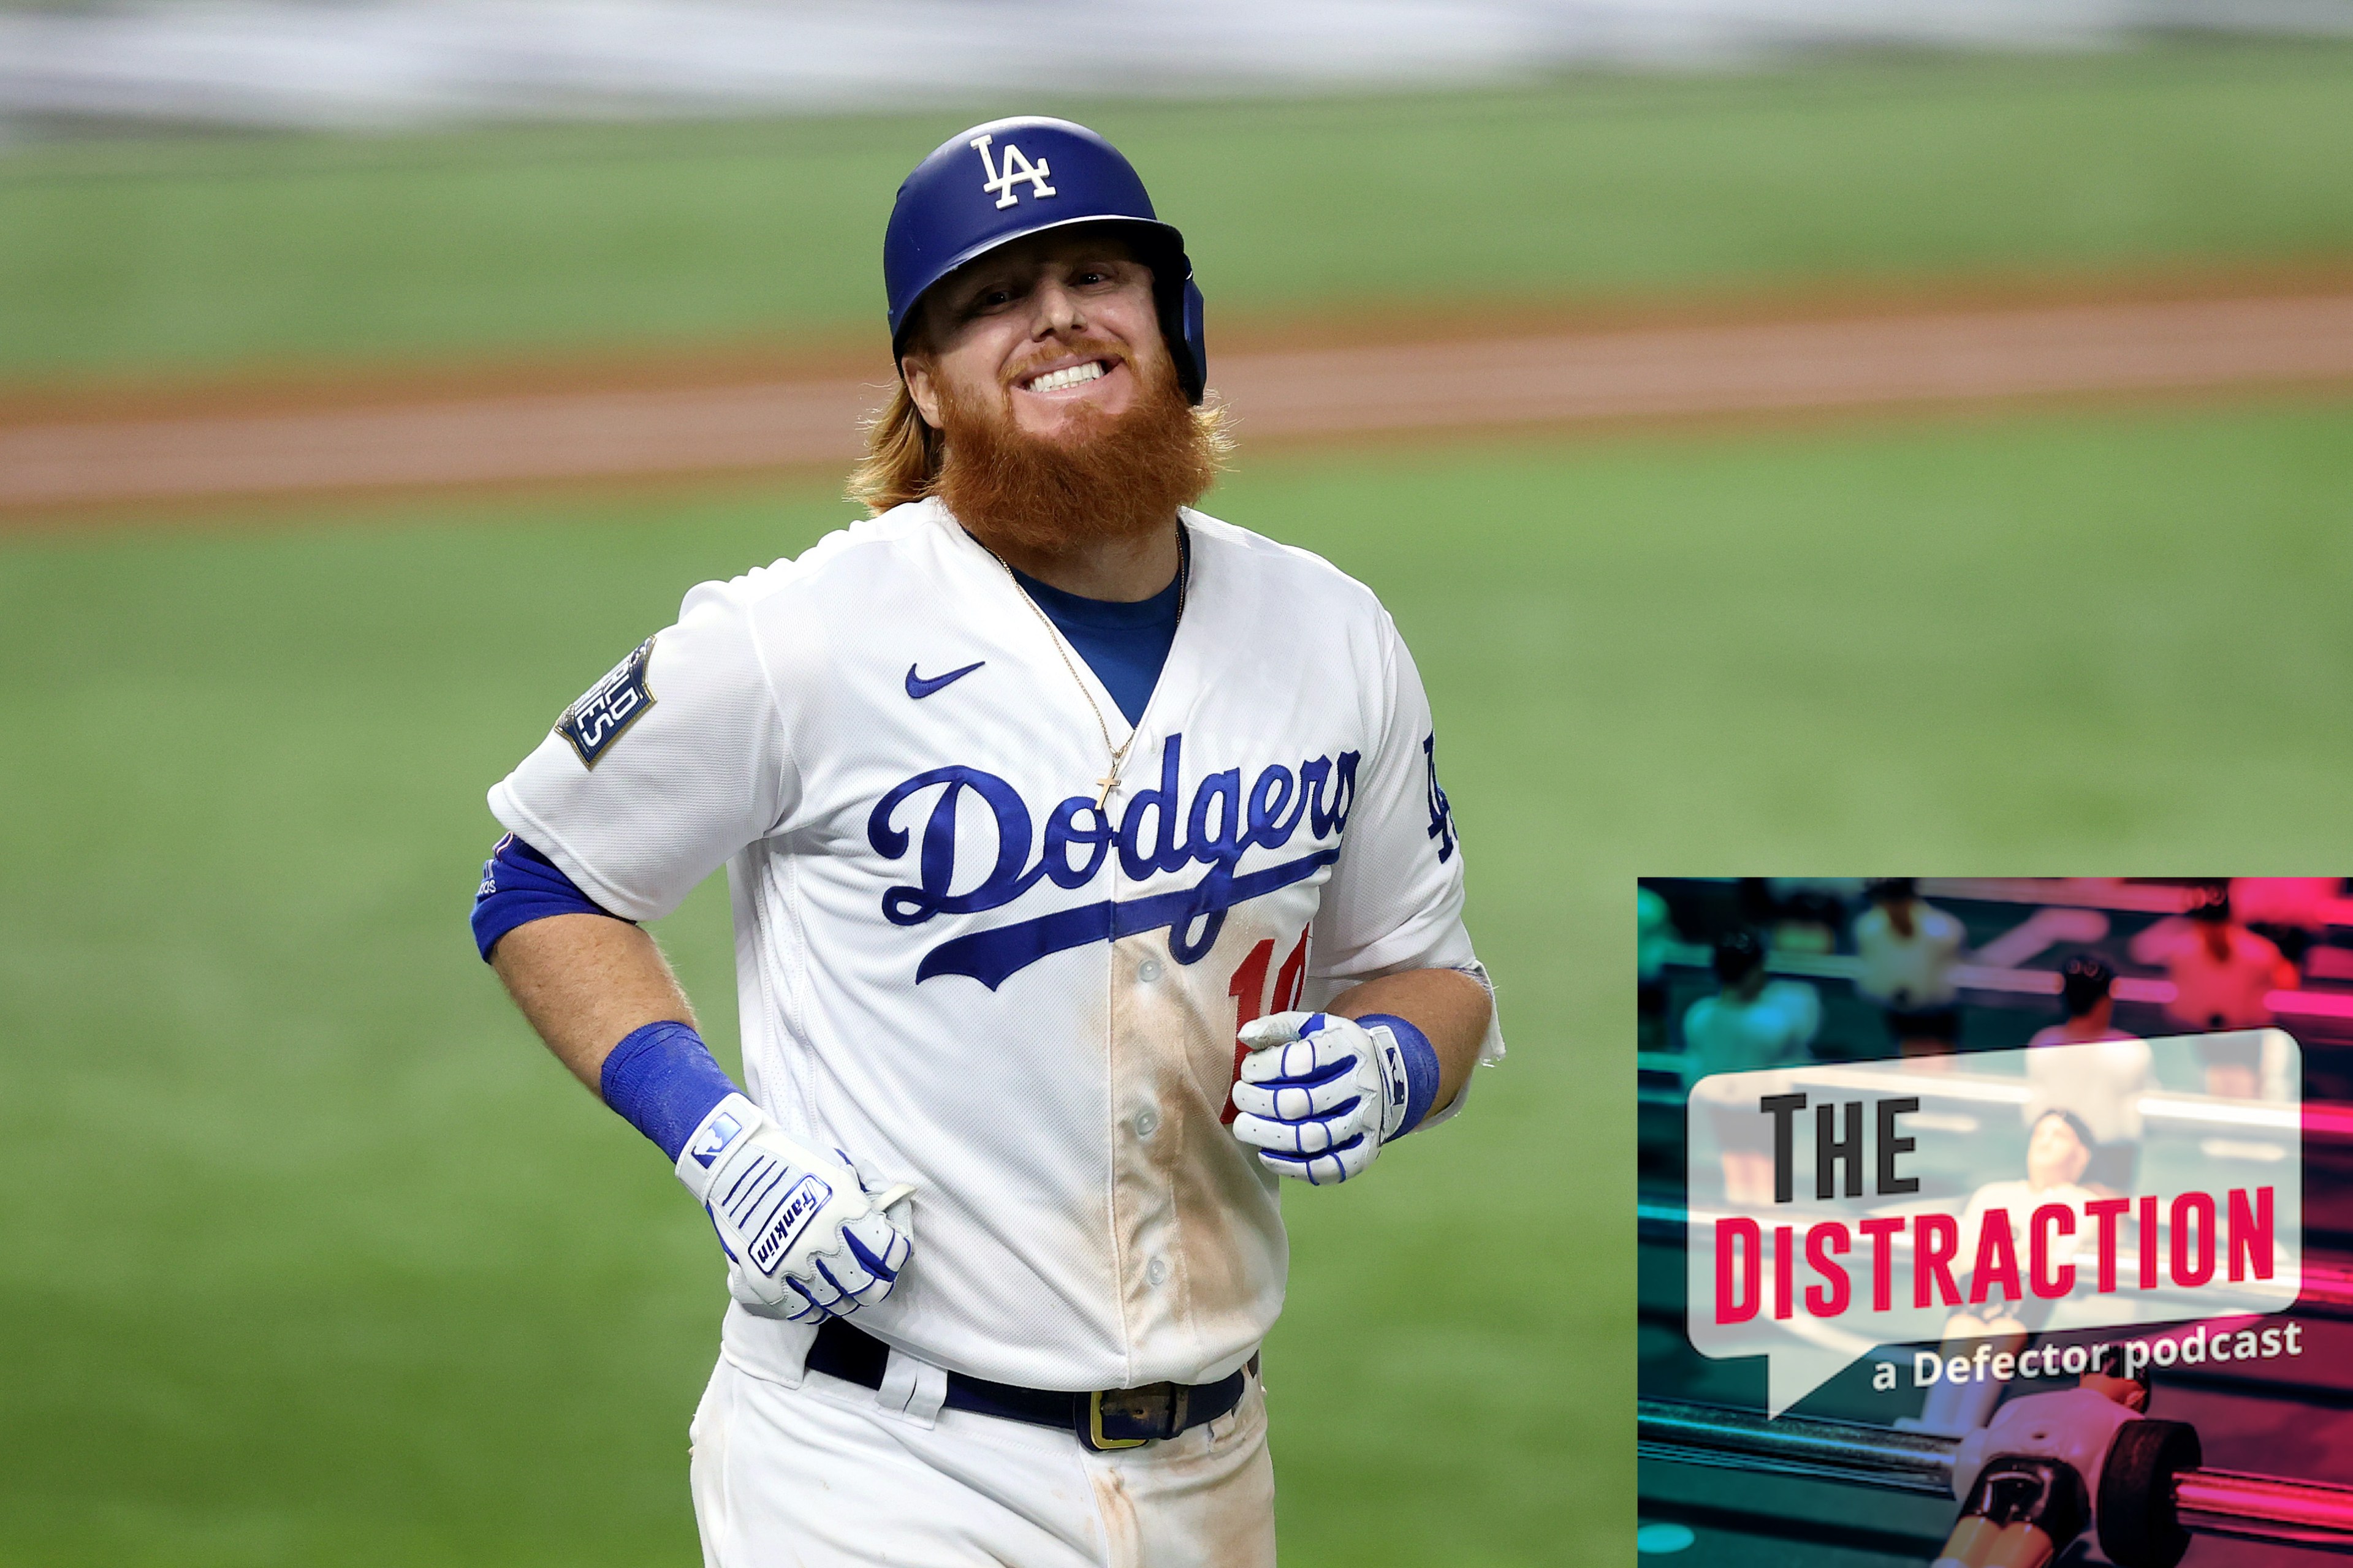 Justin Turner grimaces after nearly hitting a home run in Game 6 of the World Series, while aware he'd tested positive for Covid-19.